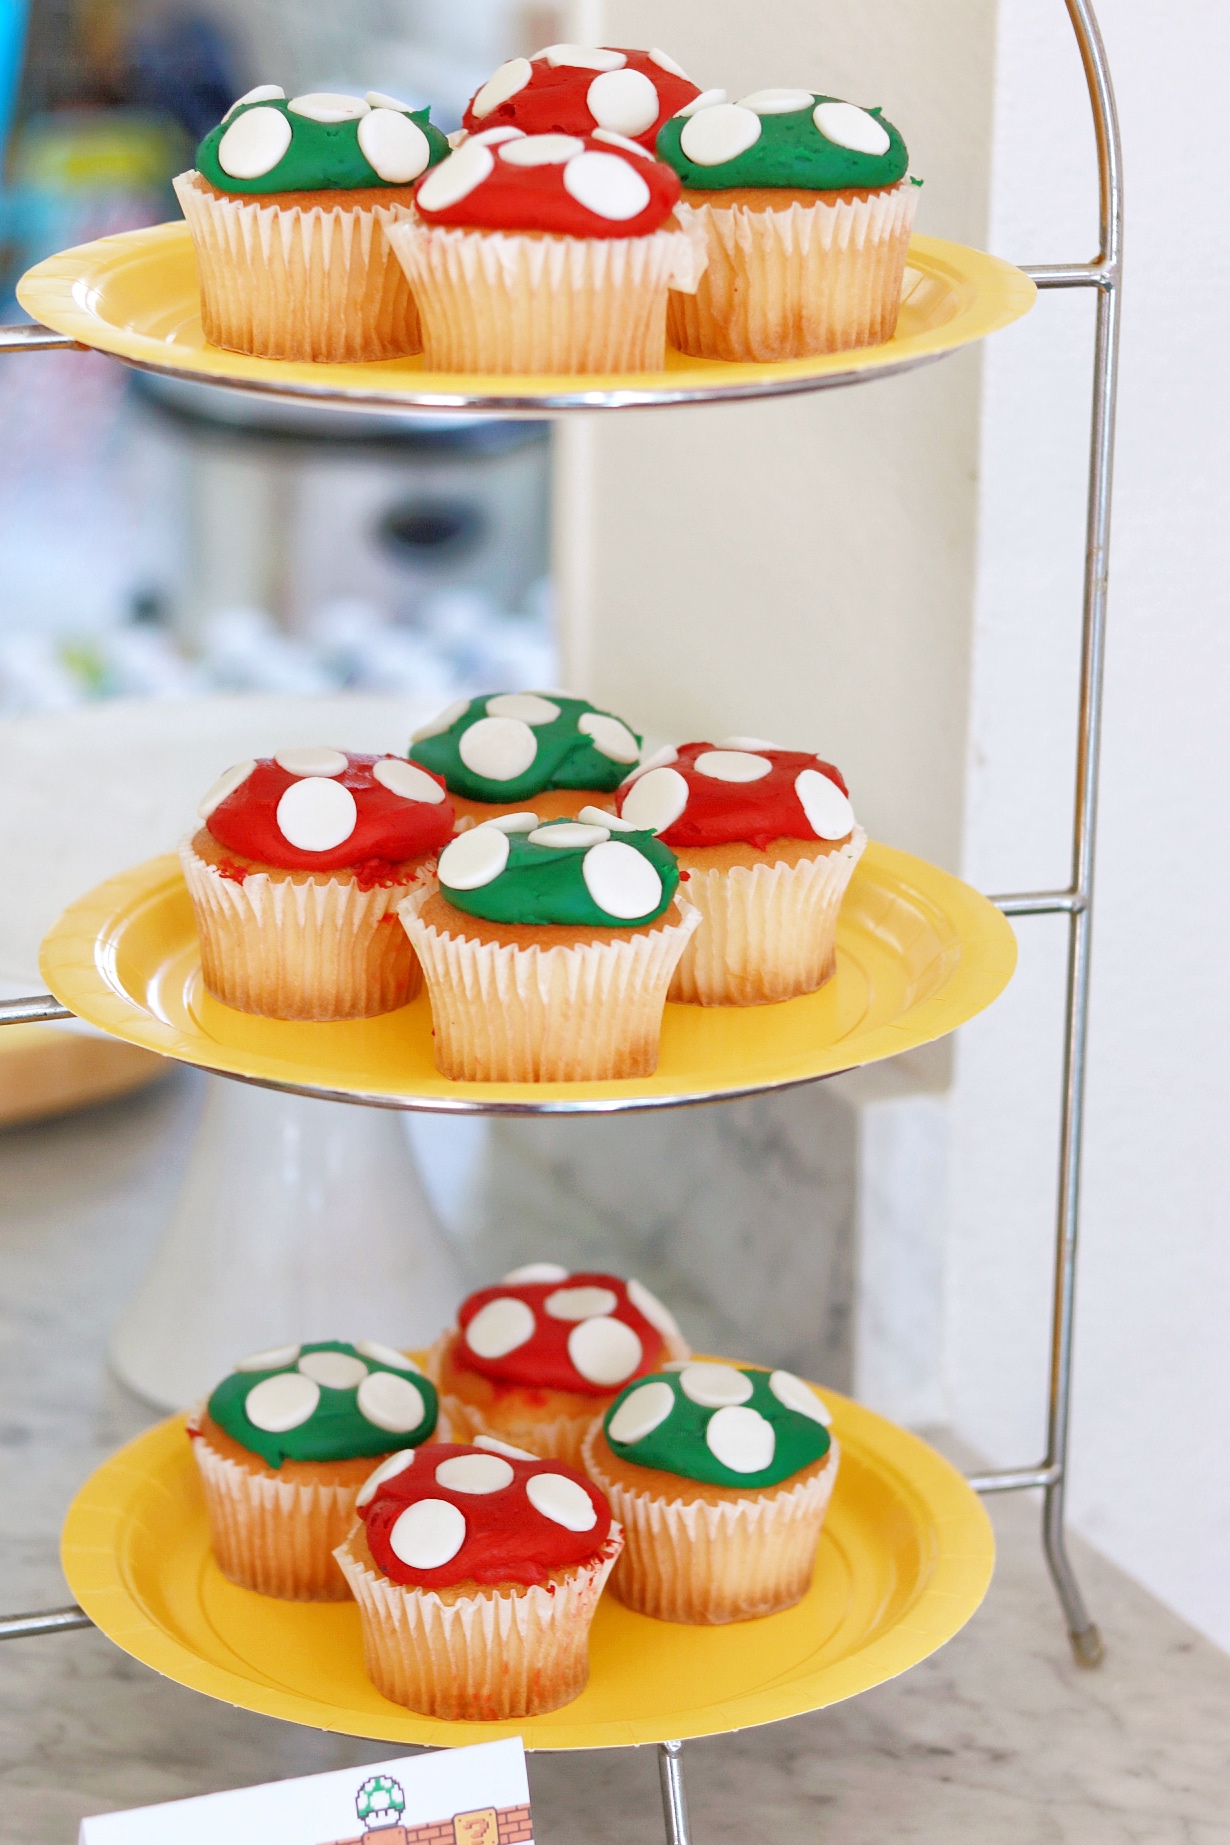 cupcakes decorated like mushrooms for a Mario birthday party